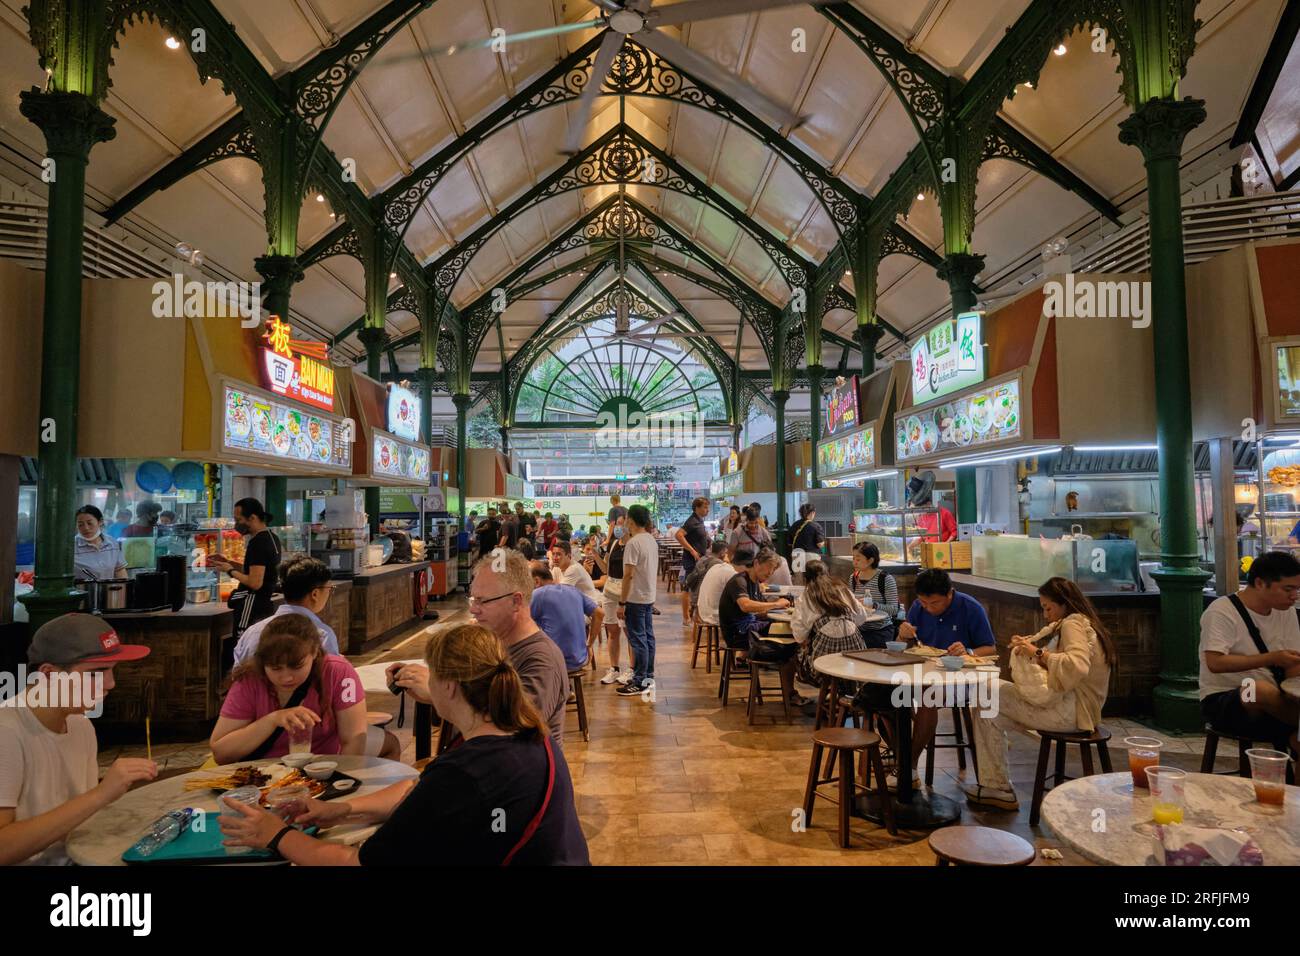 Inside Lau Pa Sat, a famous 24 hr hawker centre (food court) in Raffles Quay,  Raffles Place, Singapore, built in colonial early 20th century style Stock Photo